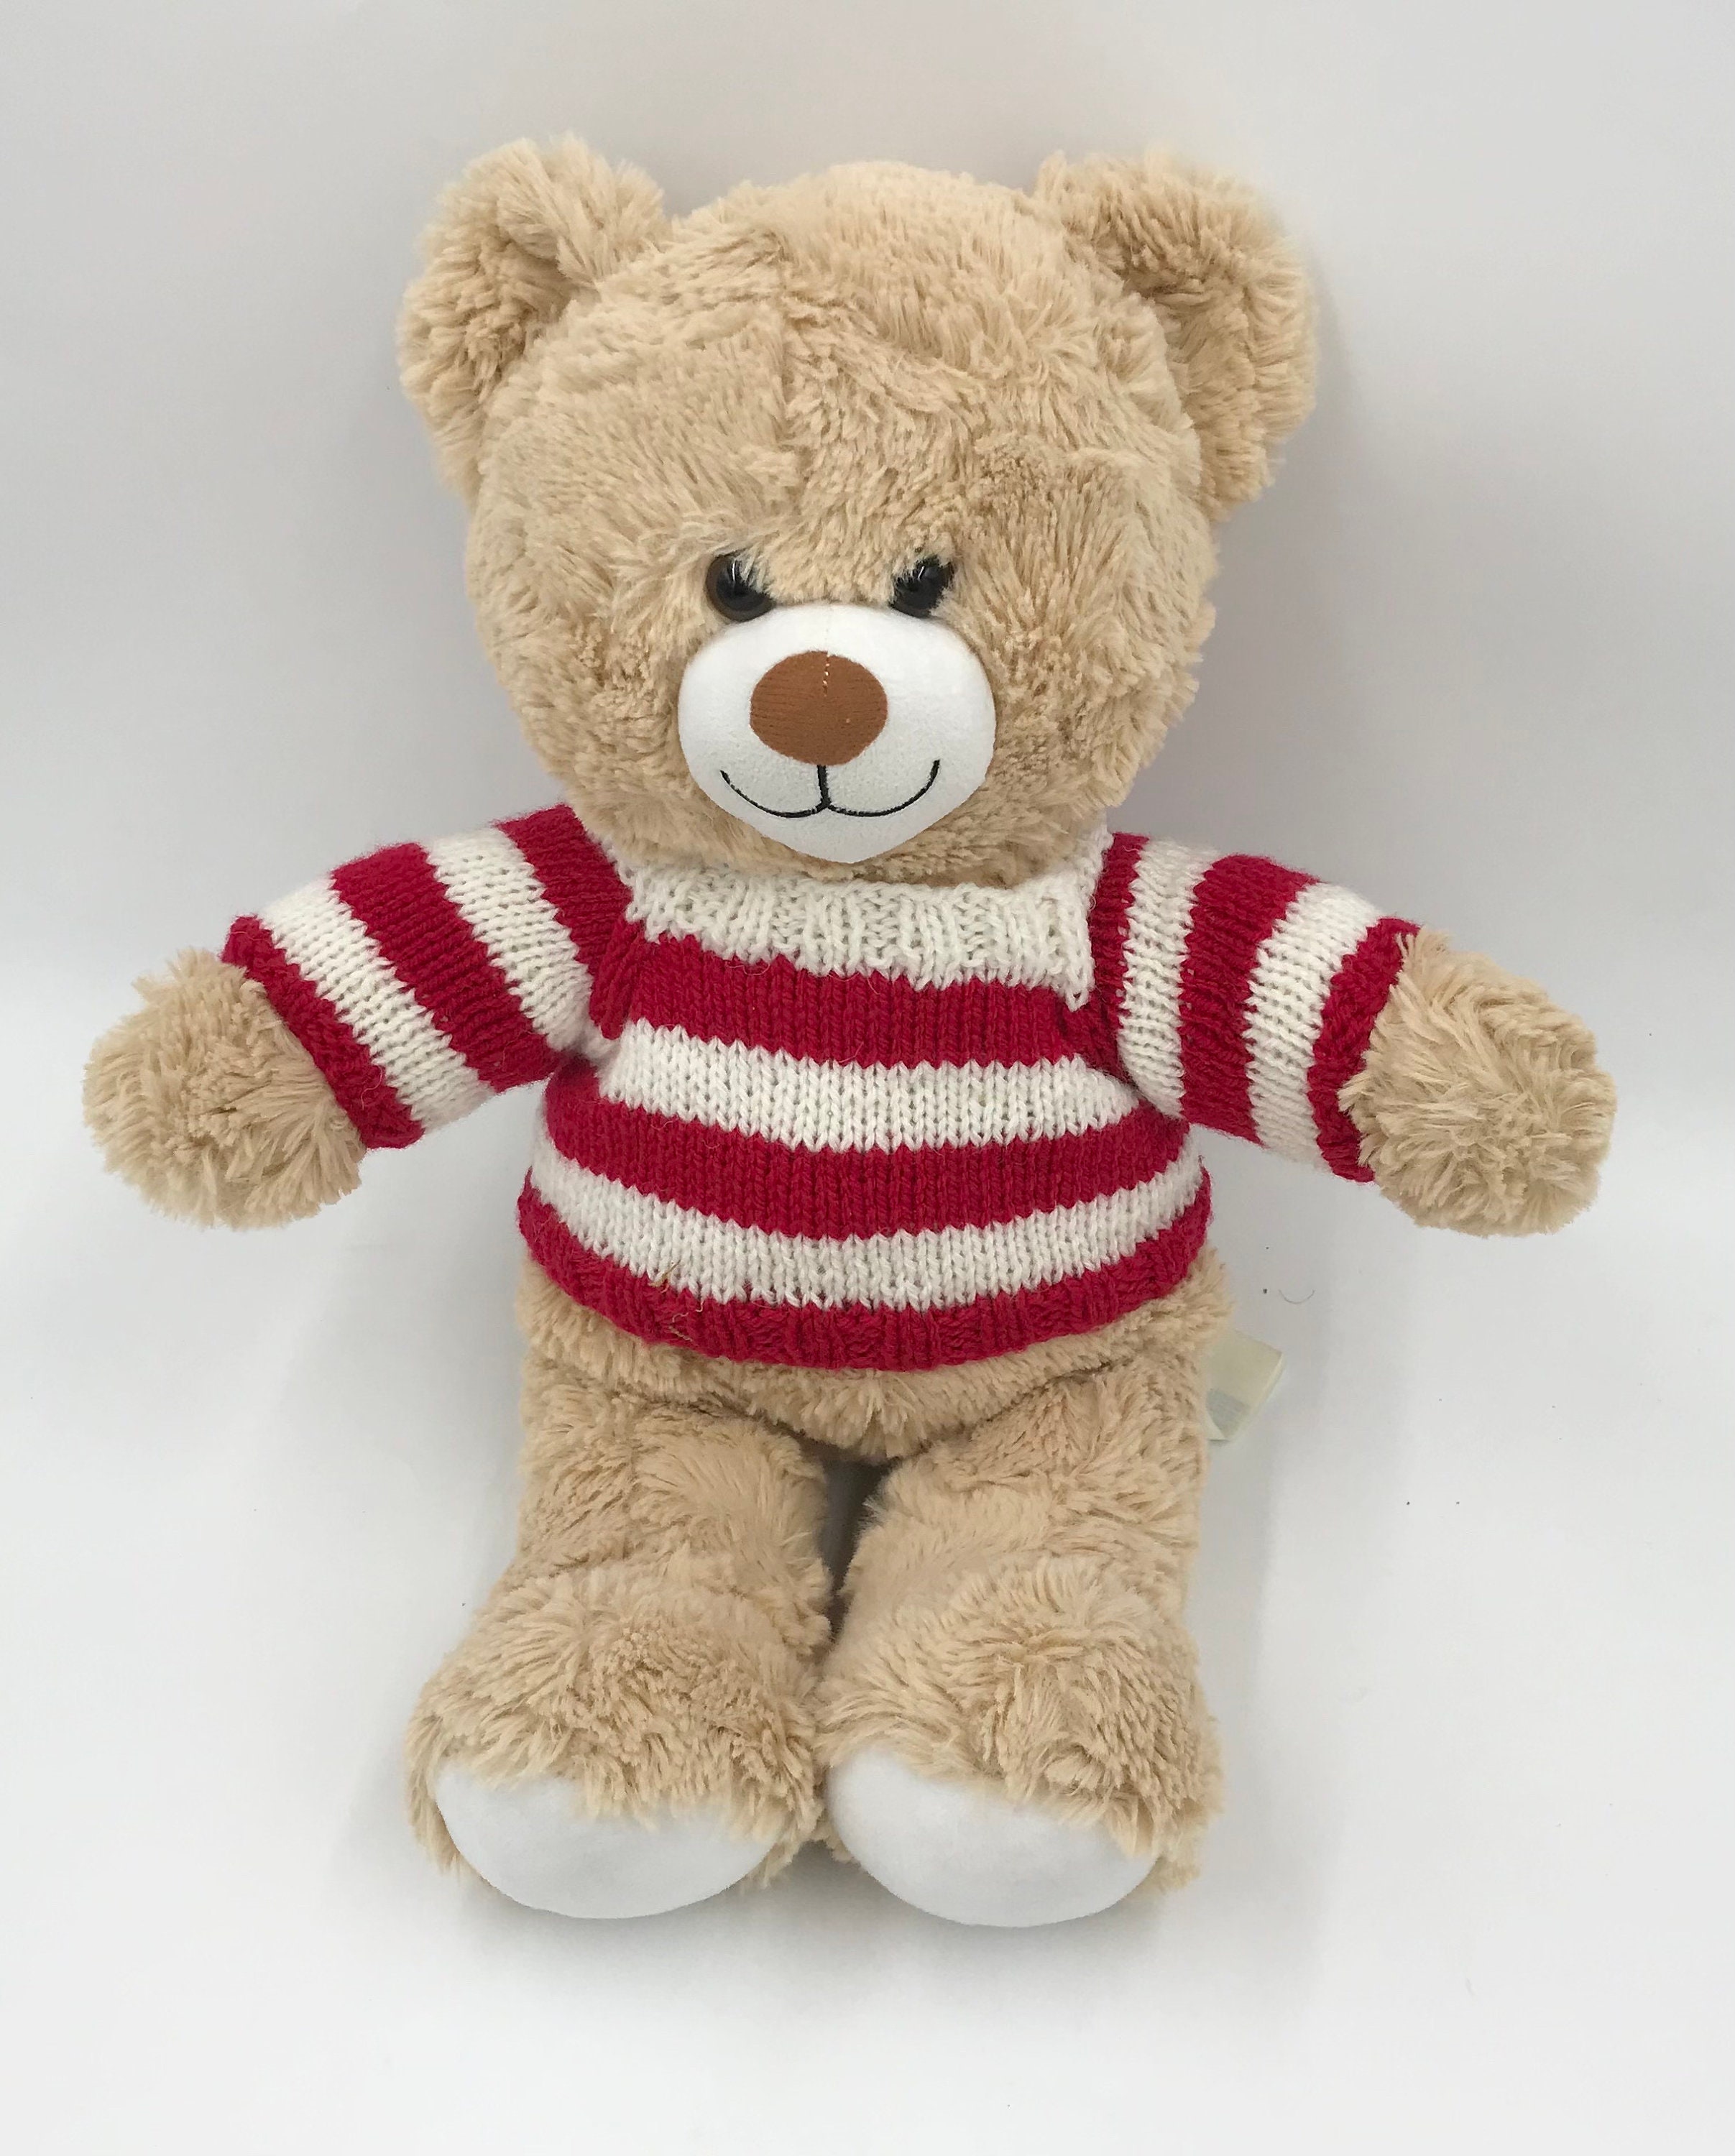 One of a kind brown teddy bear in a striped sweater